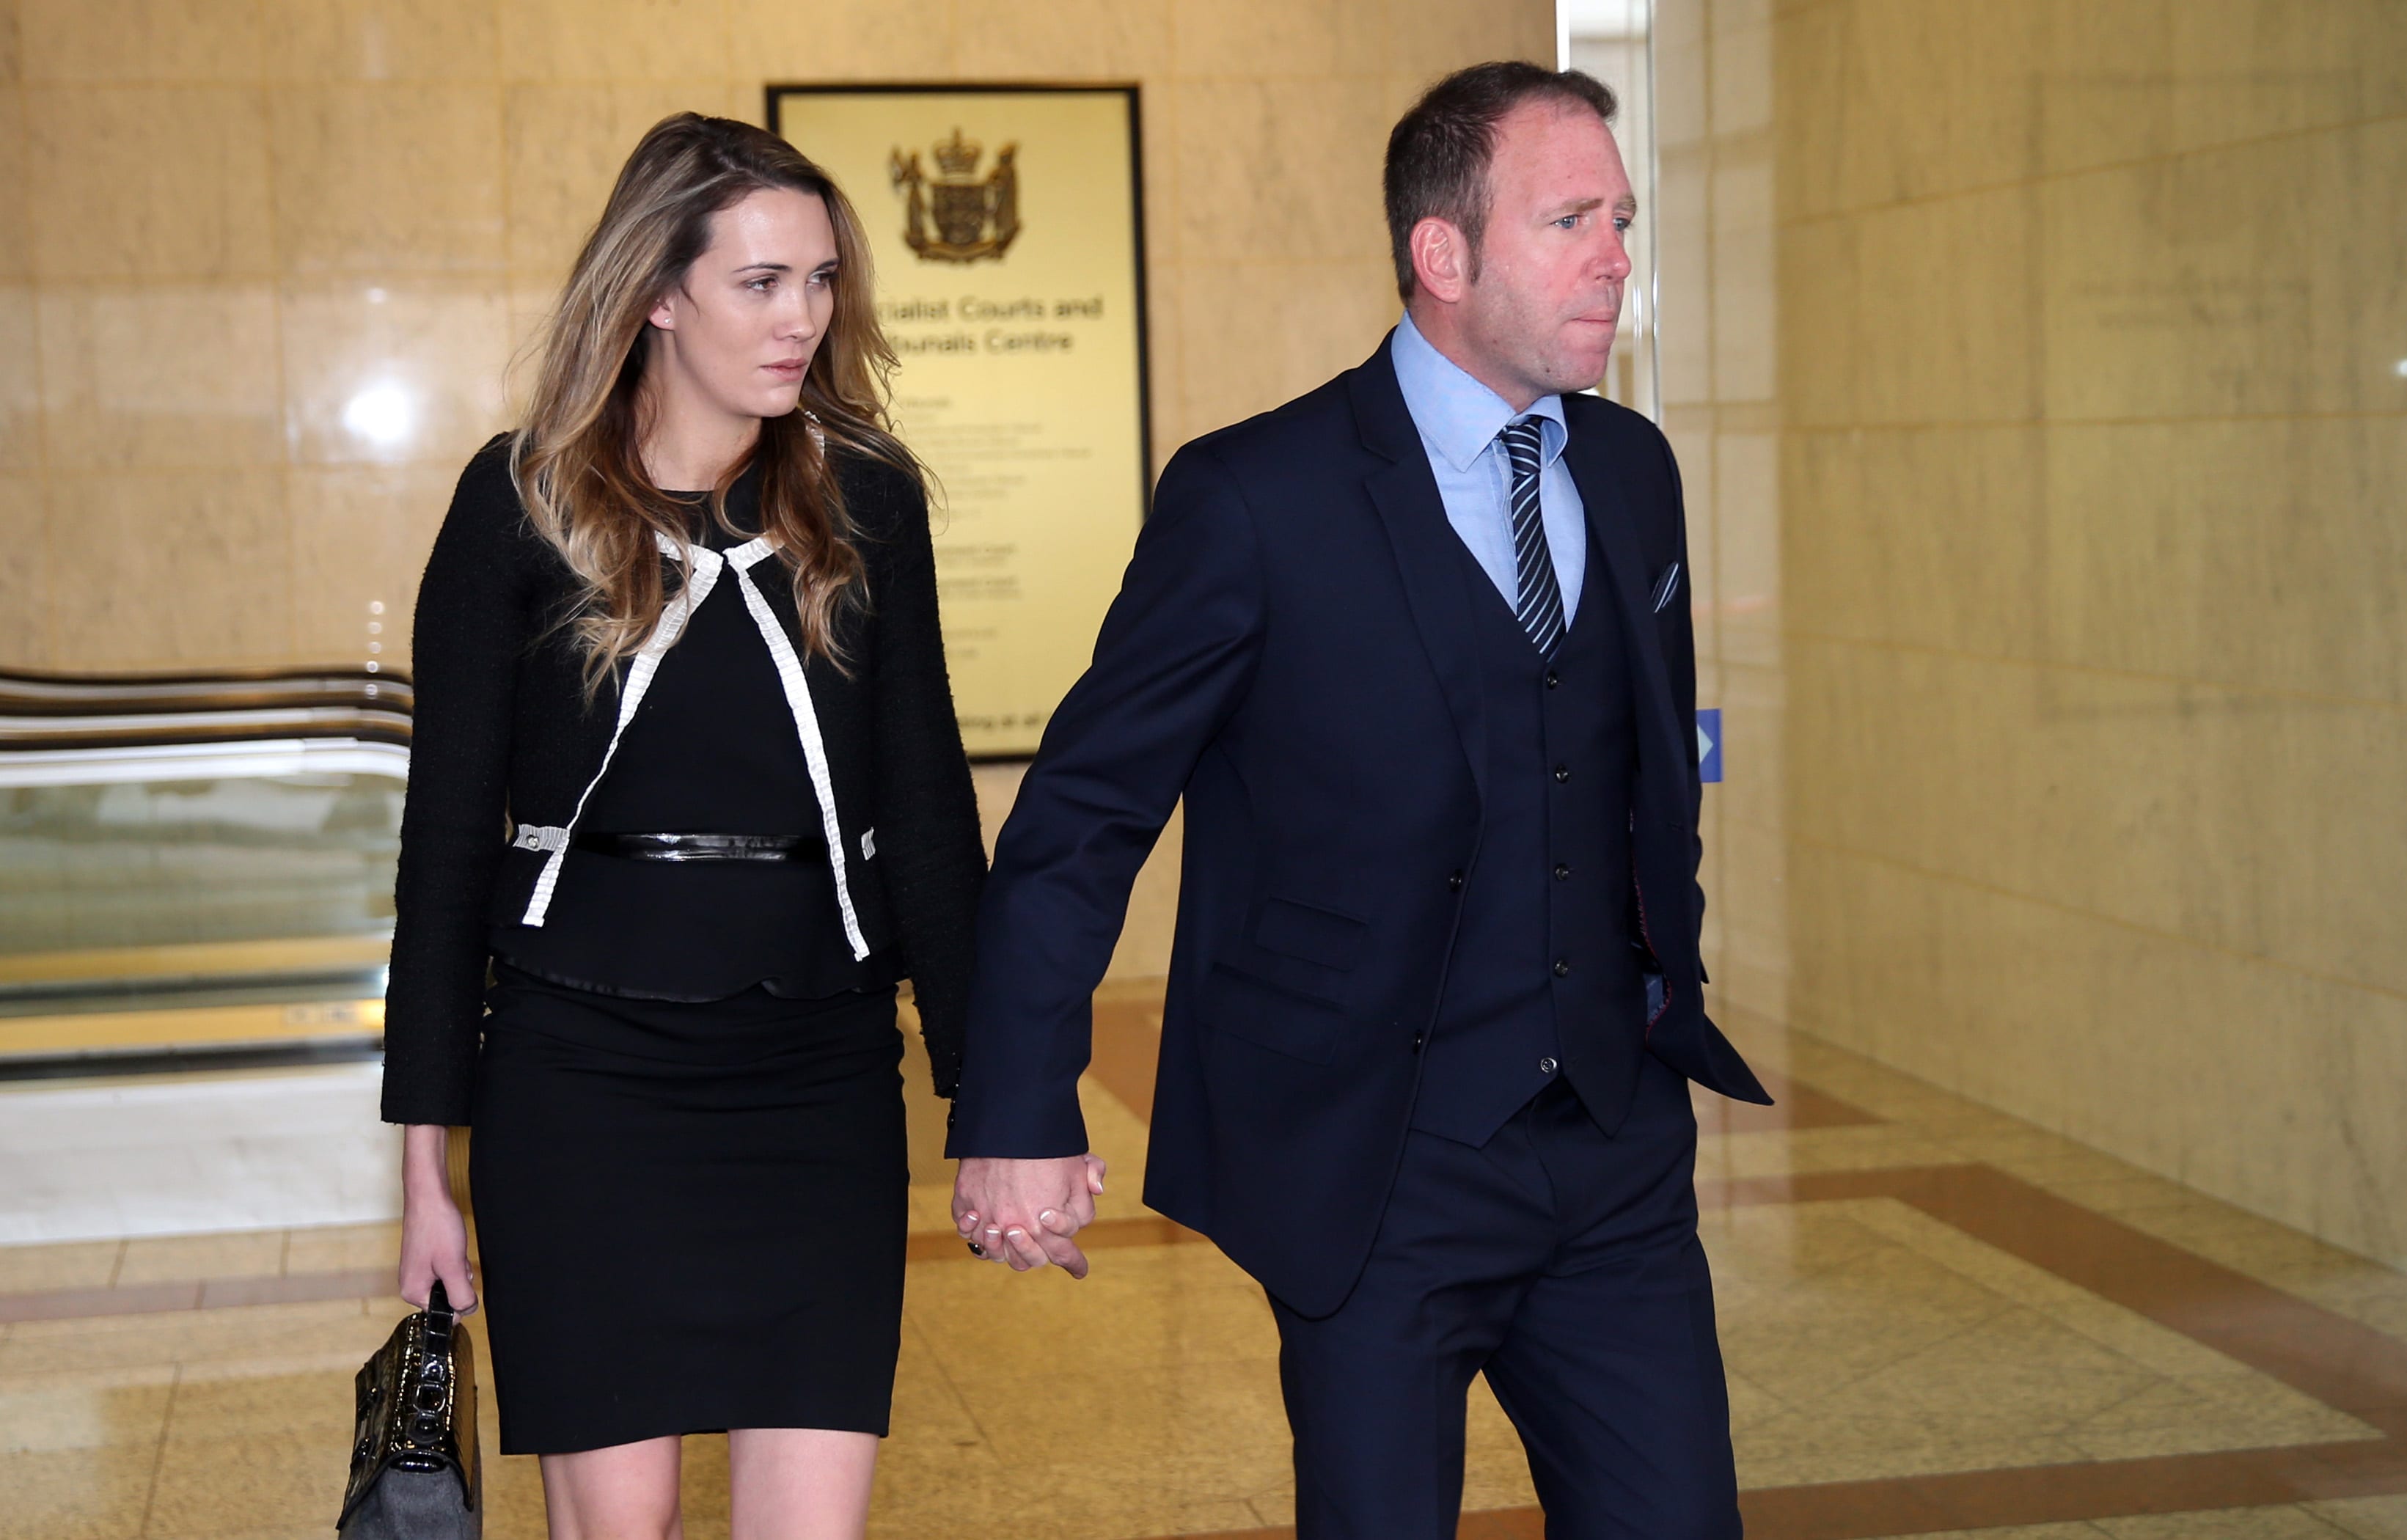 Ex-Megaupload executive Finn Batato and his wife Anastasia leave court for lunch